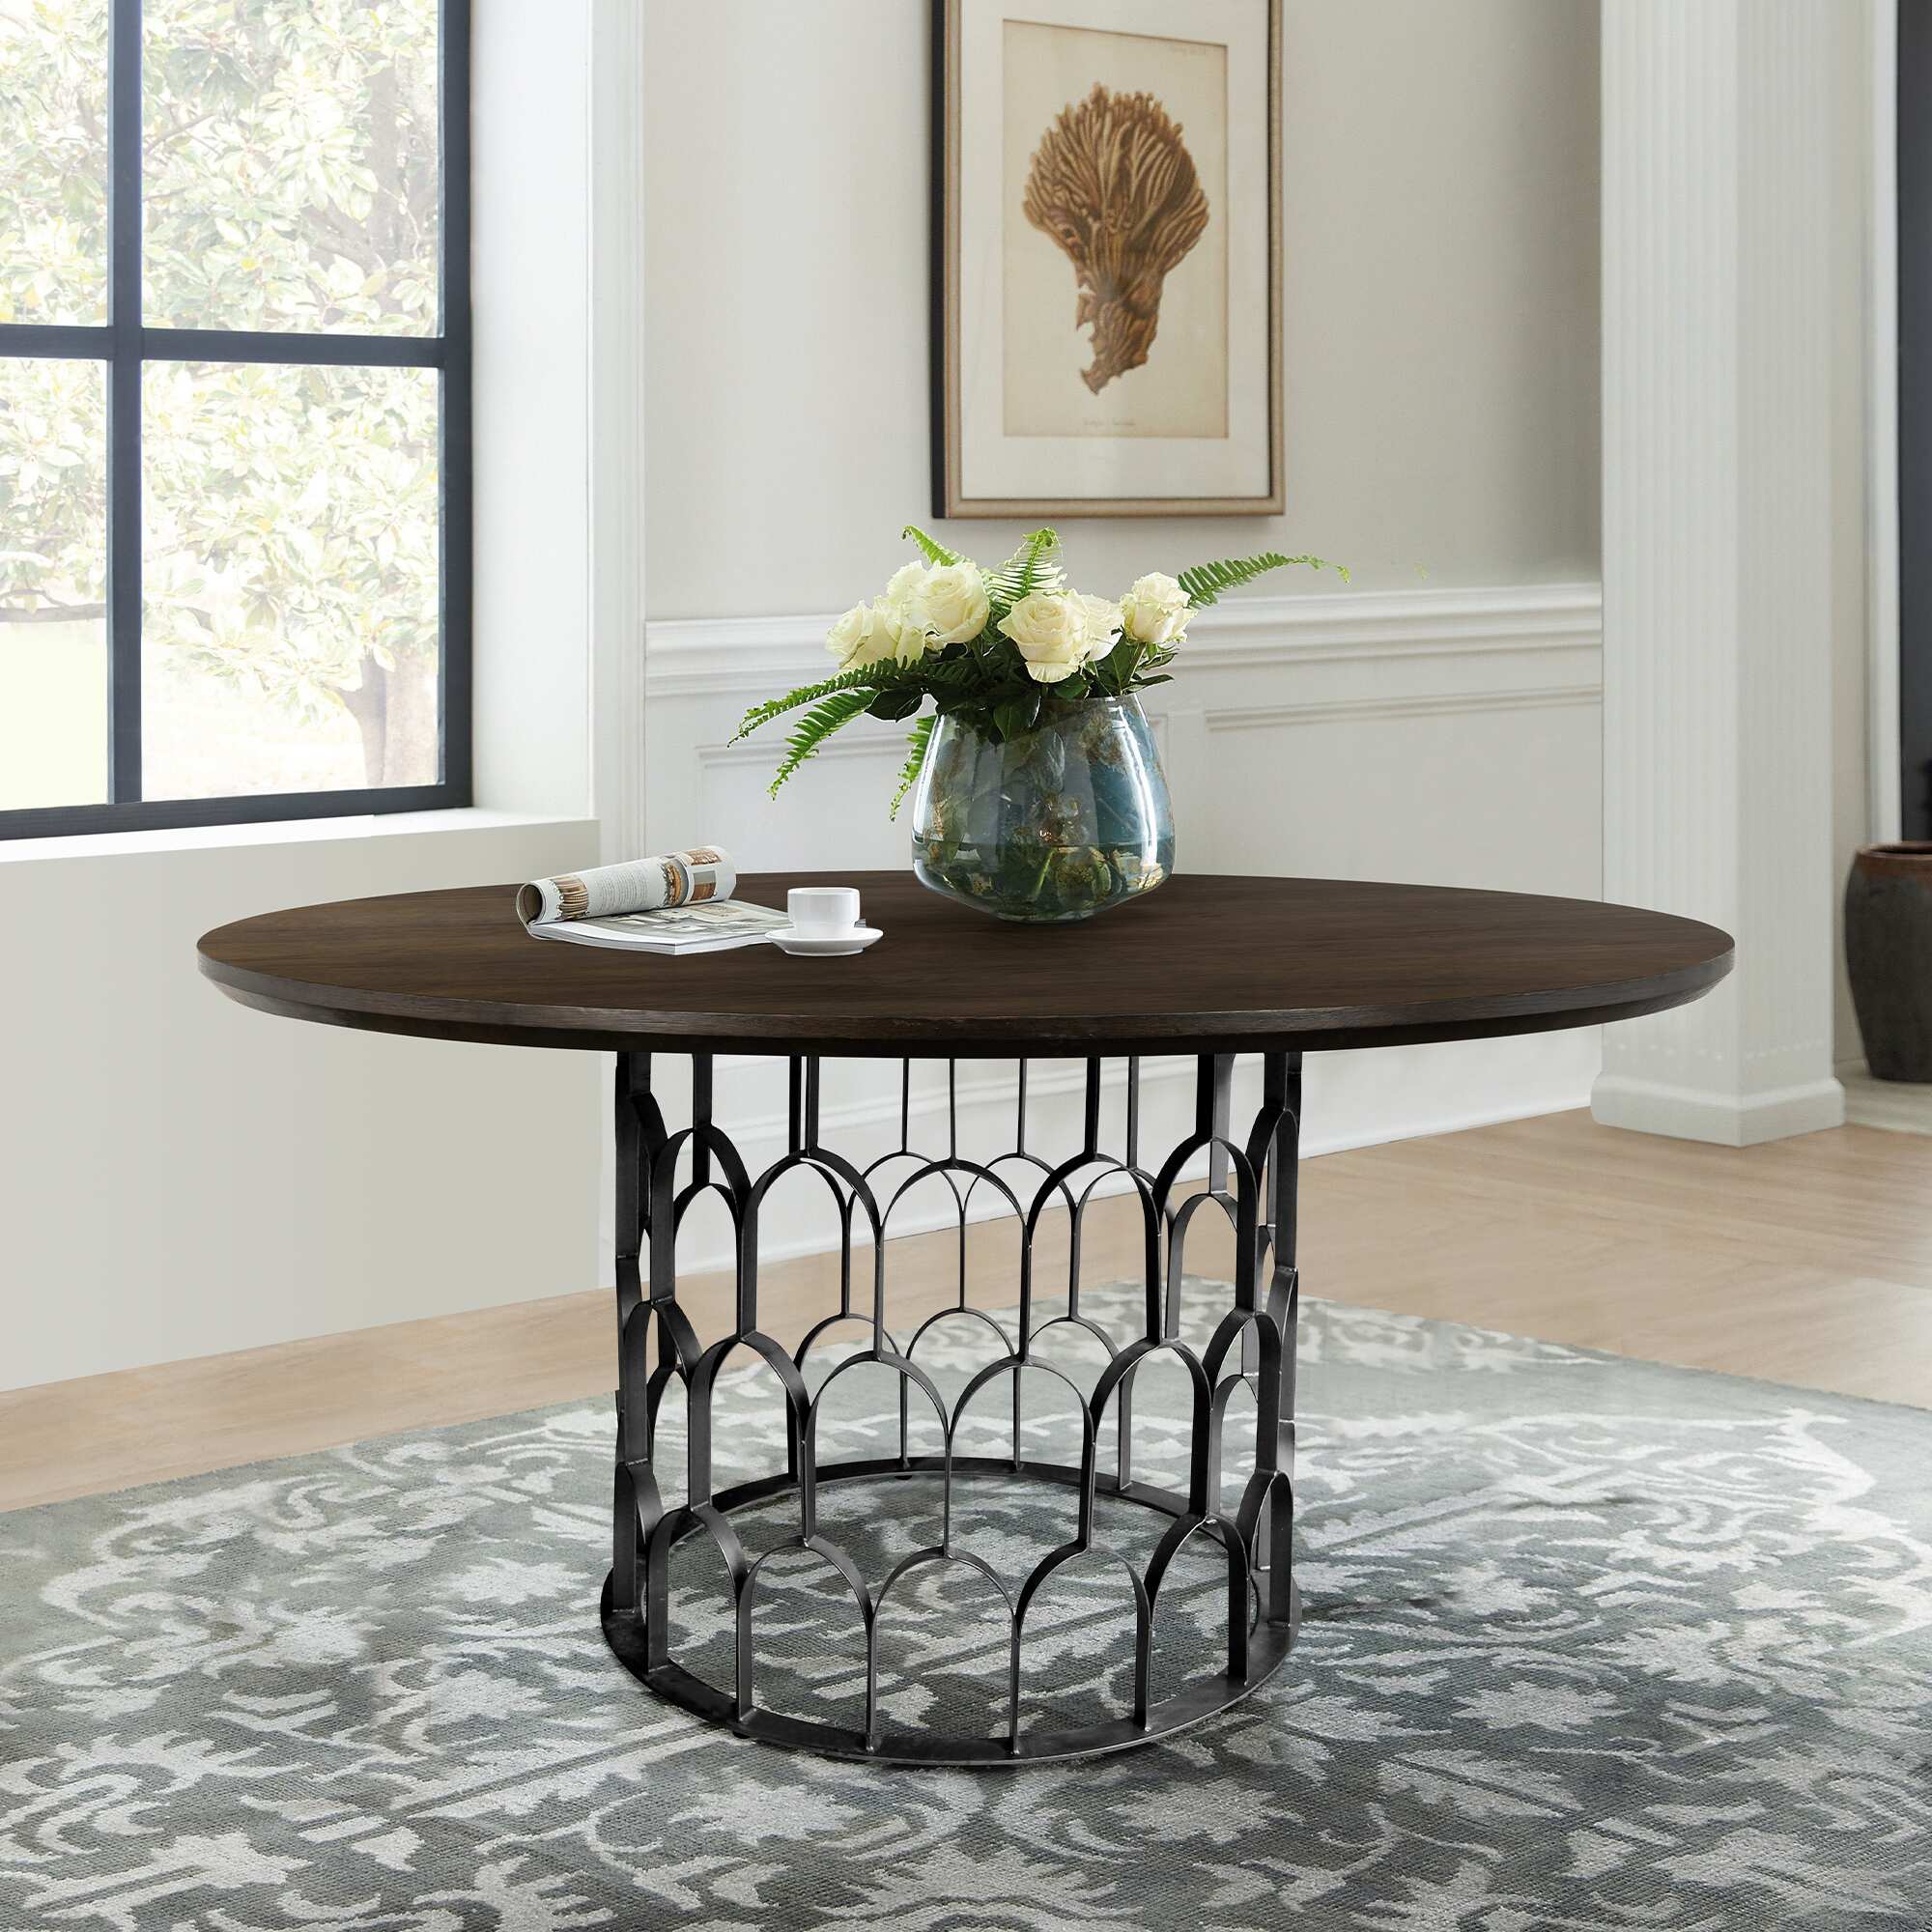 Gatsby Concrete or Wood 55" Round Dining Table with Metal Pedestal Base